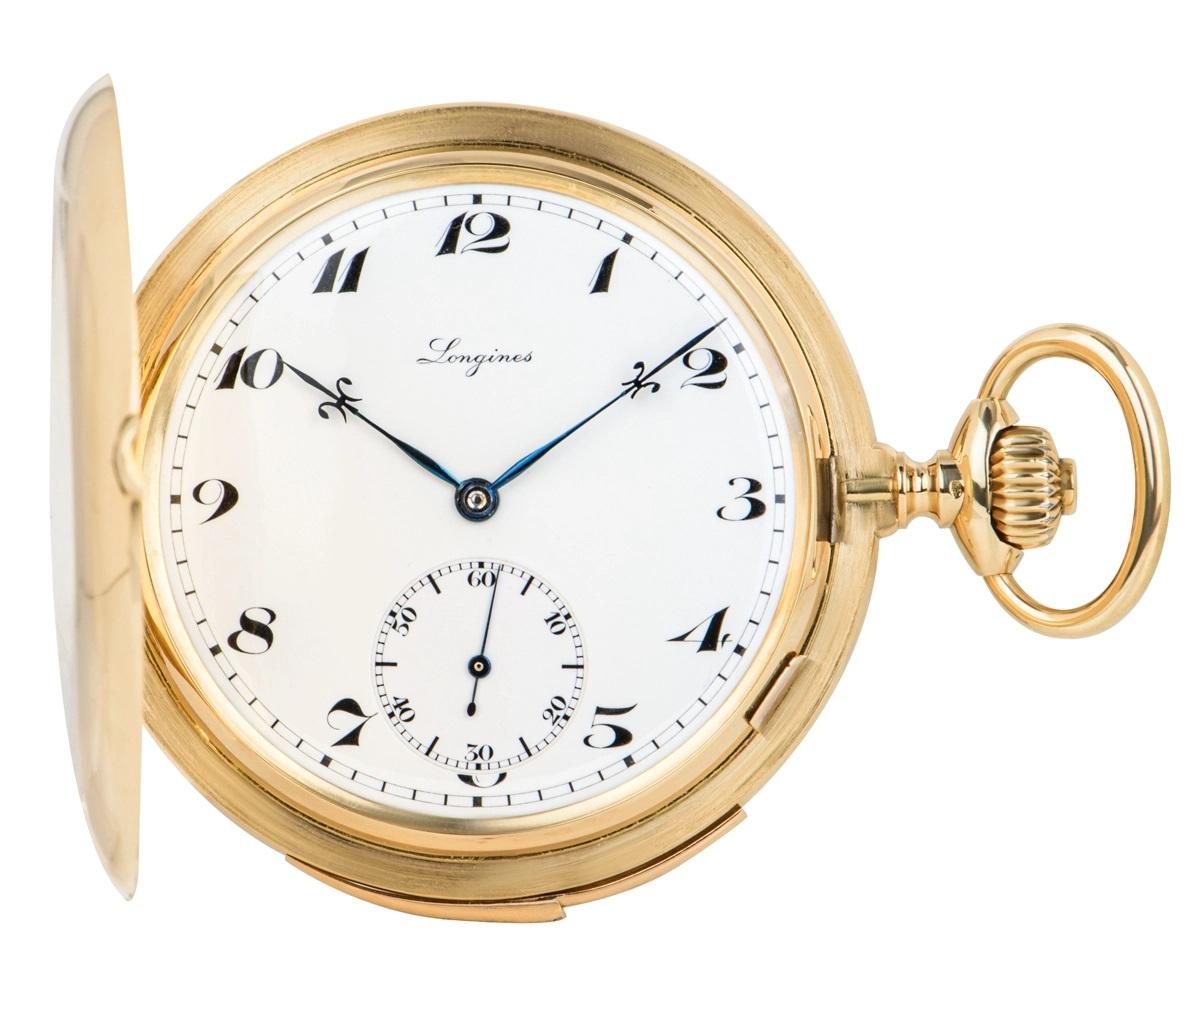 Longines 18ct yellow gold full hunter minute repeater pocket watch, C1920s.

Dial: A beautiful signed white enamel dial with Arabic numerals and a subsidiary seconds dial with unusual blued steel Fleur-de- Lis hands.

Case: The heavy slim yellow